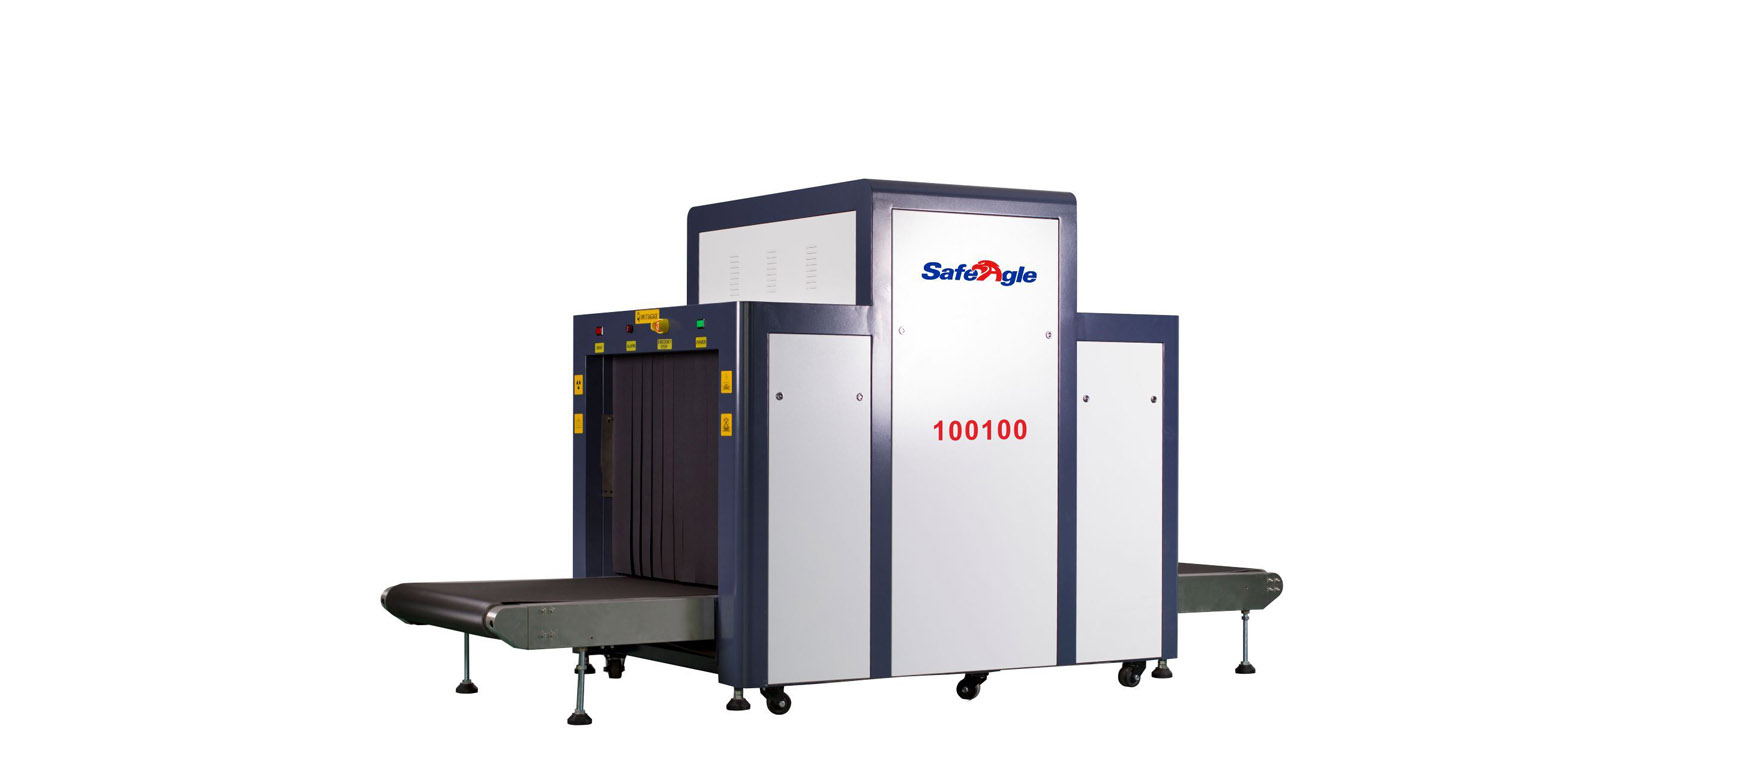 x-ray security scanning equipment